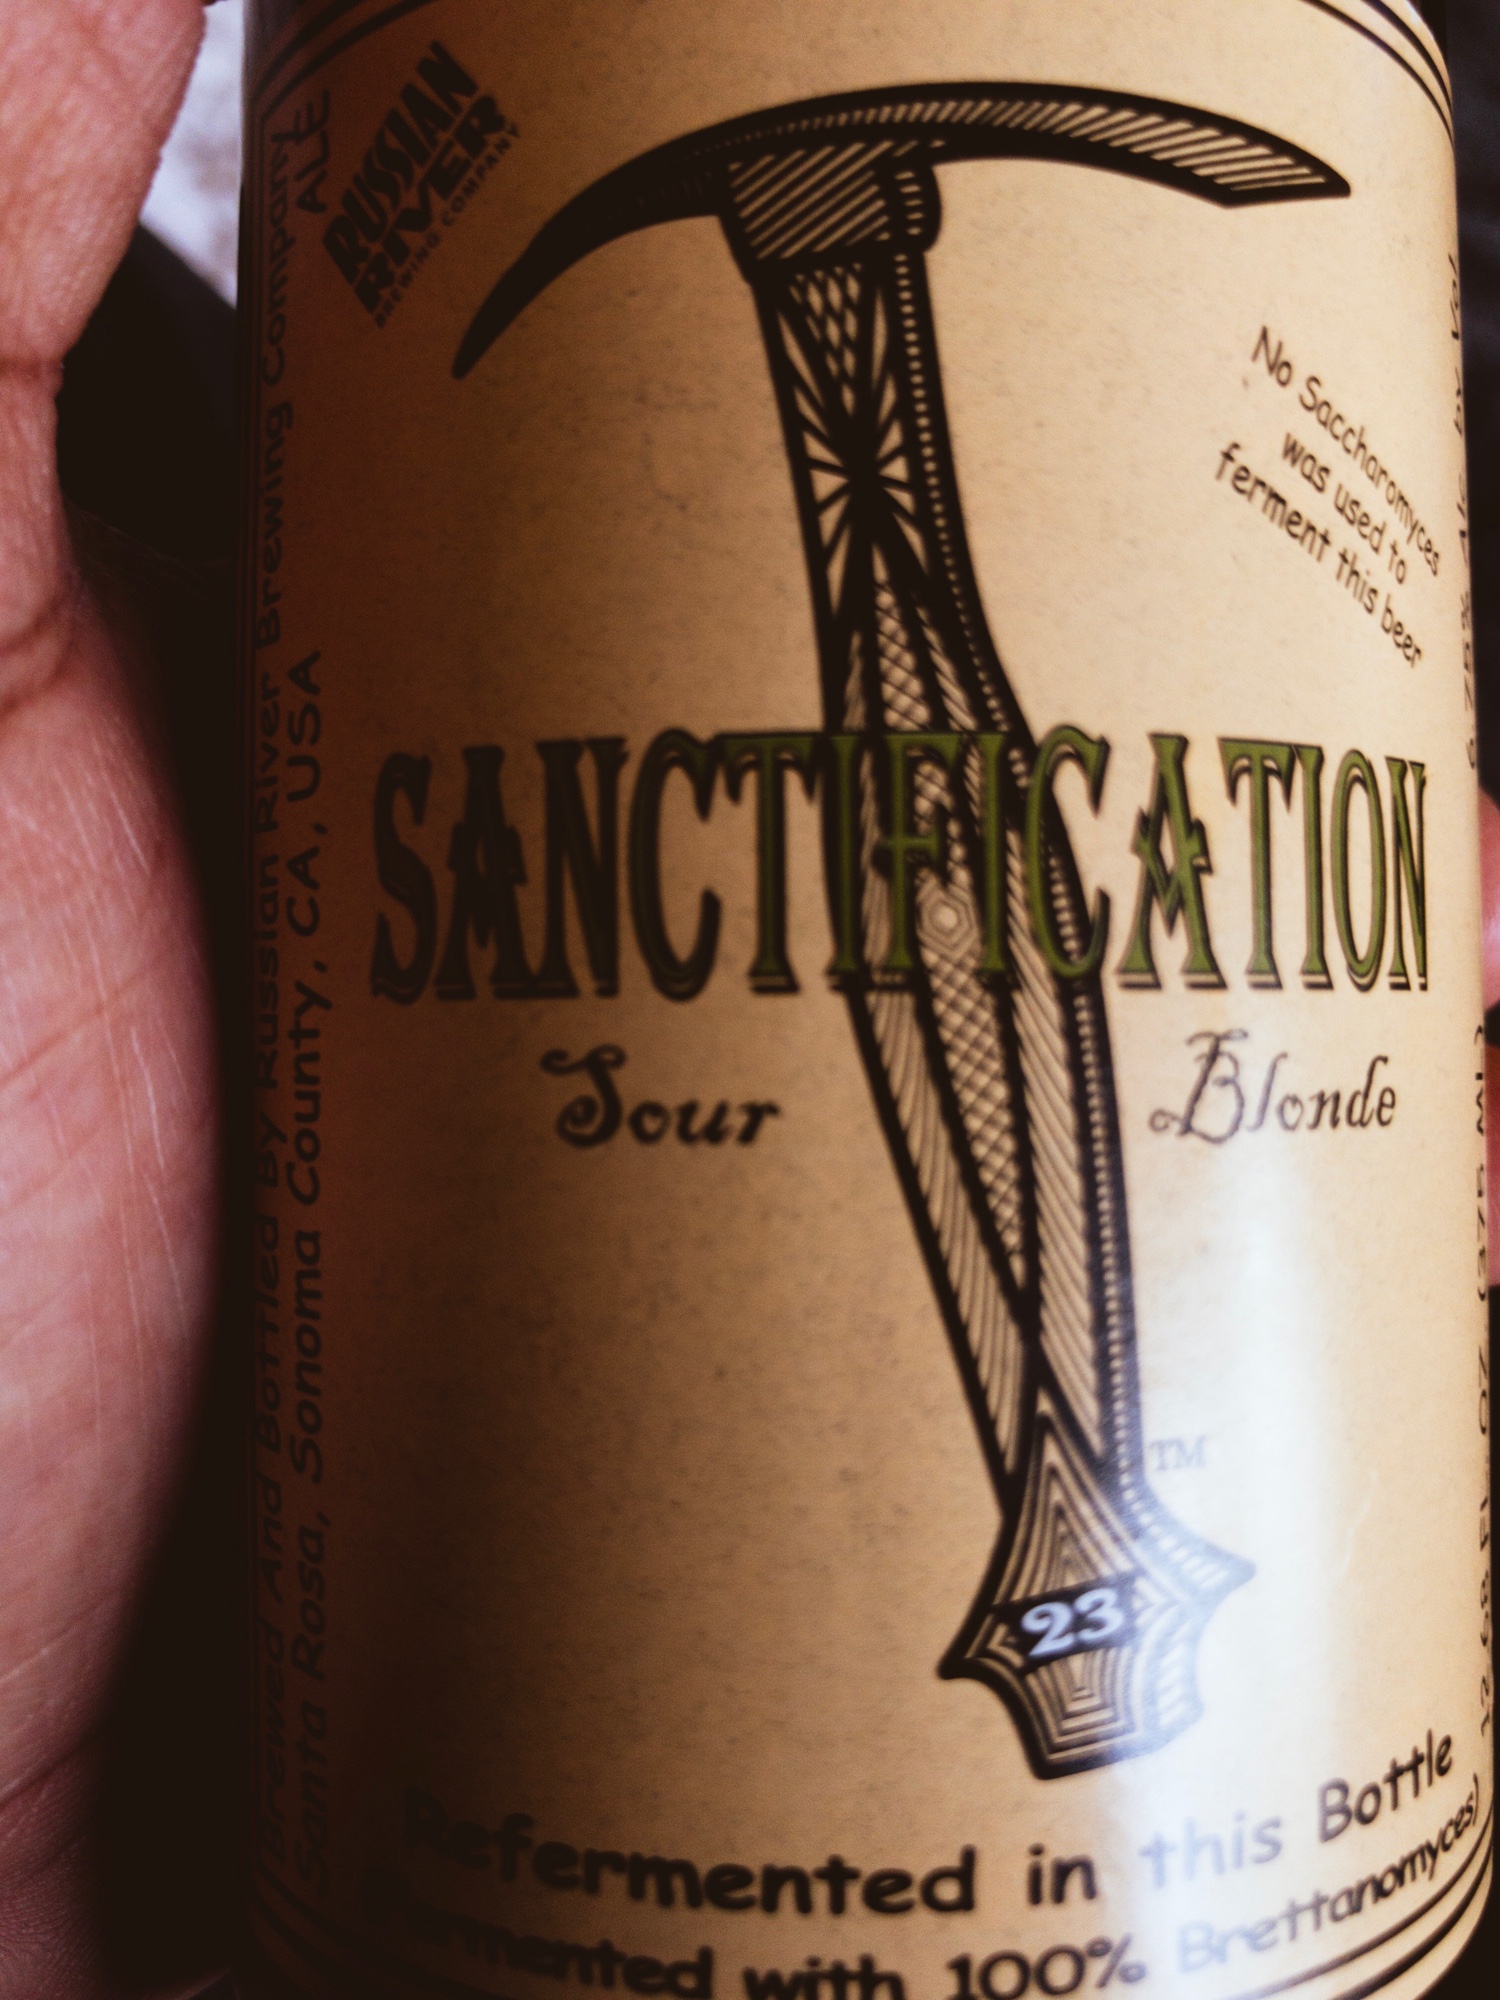 Russian River Brewing Company's Sanctification